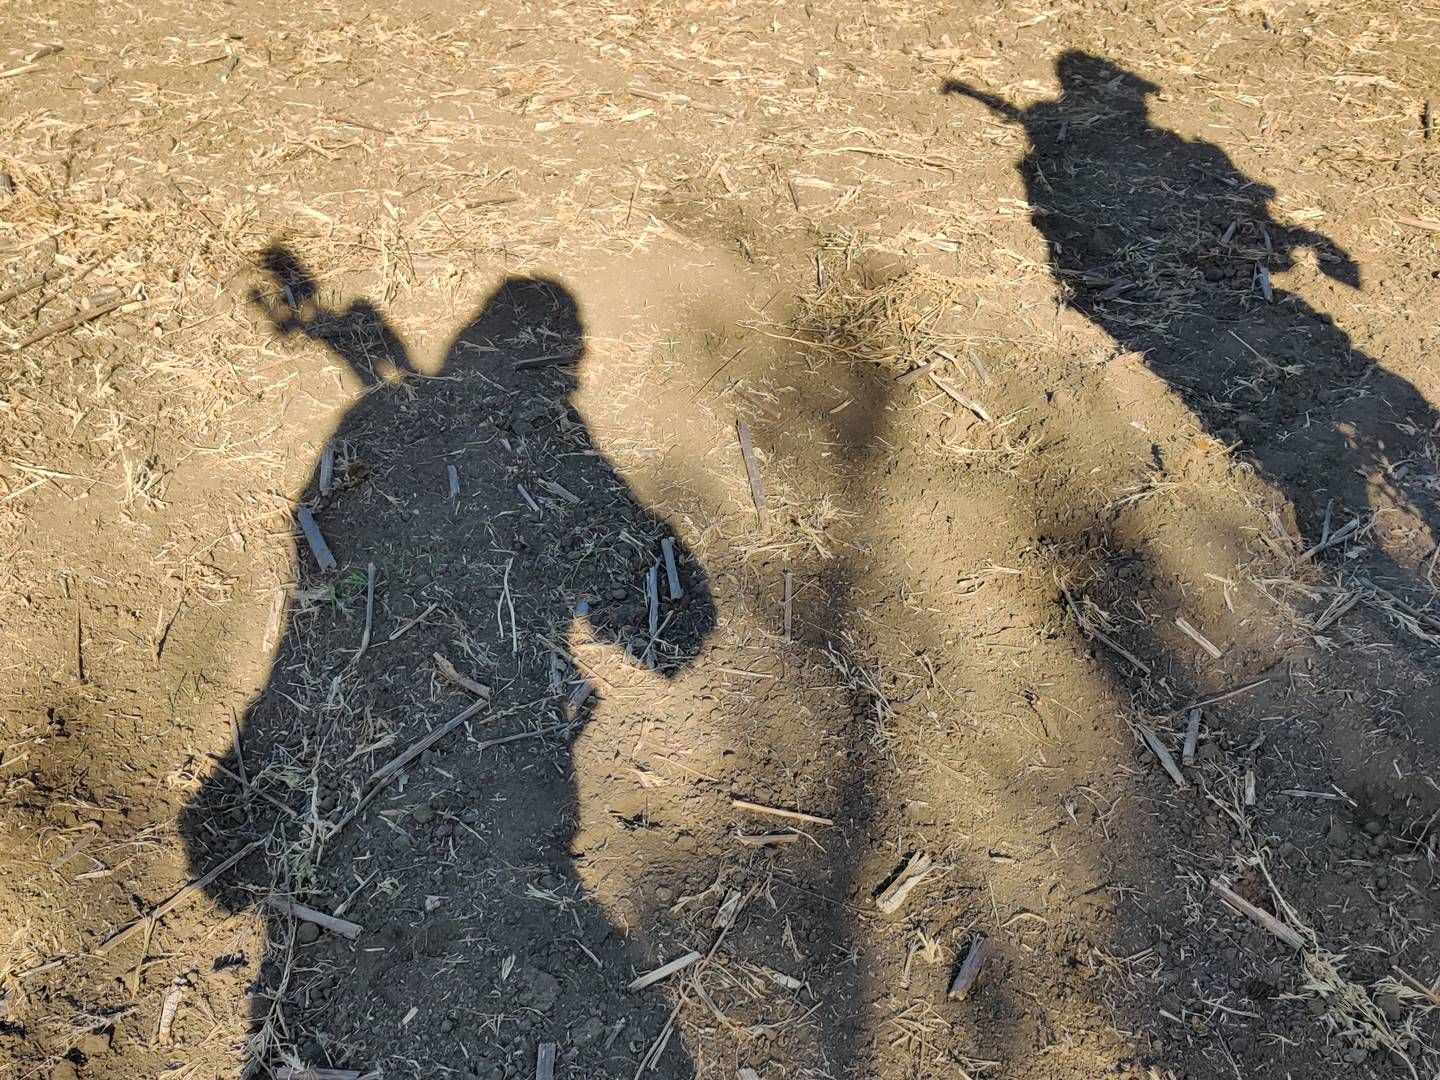 Shadows of a Ukrainian sniper team during the summer of 2022. | Foto: Privatfoto